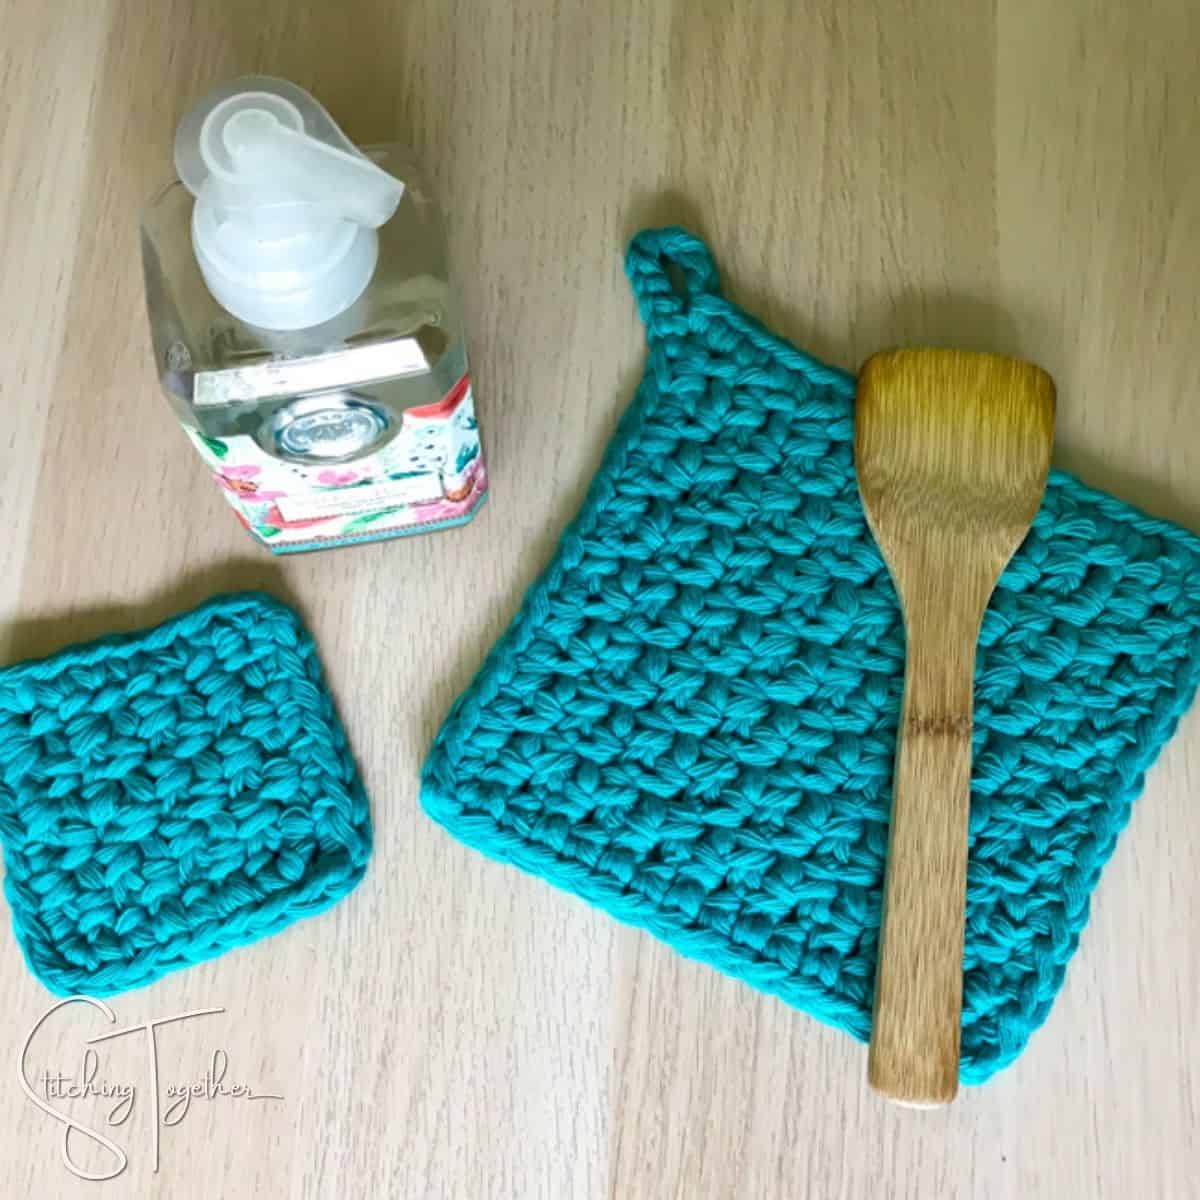 large and small crocheted pot holders laying flat with bottle of soap nearby and a wooden spoon laying on the large potholder